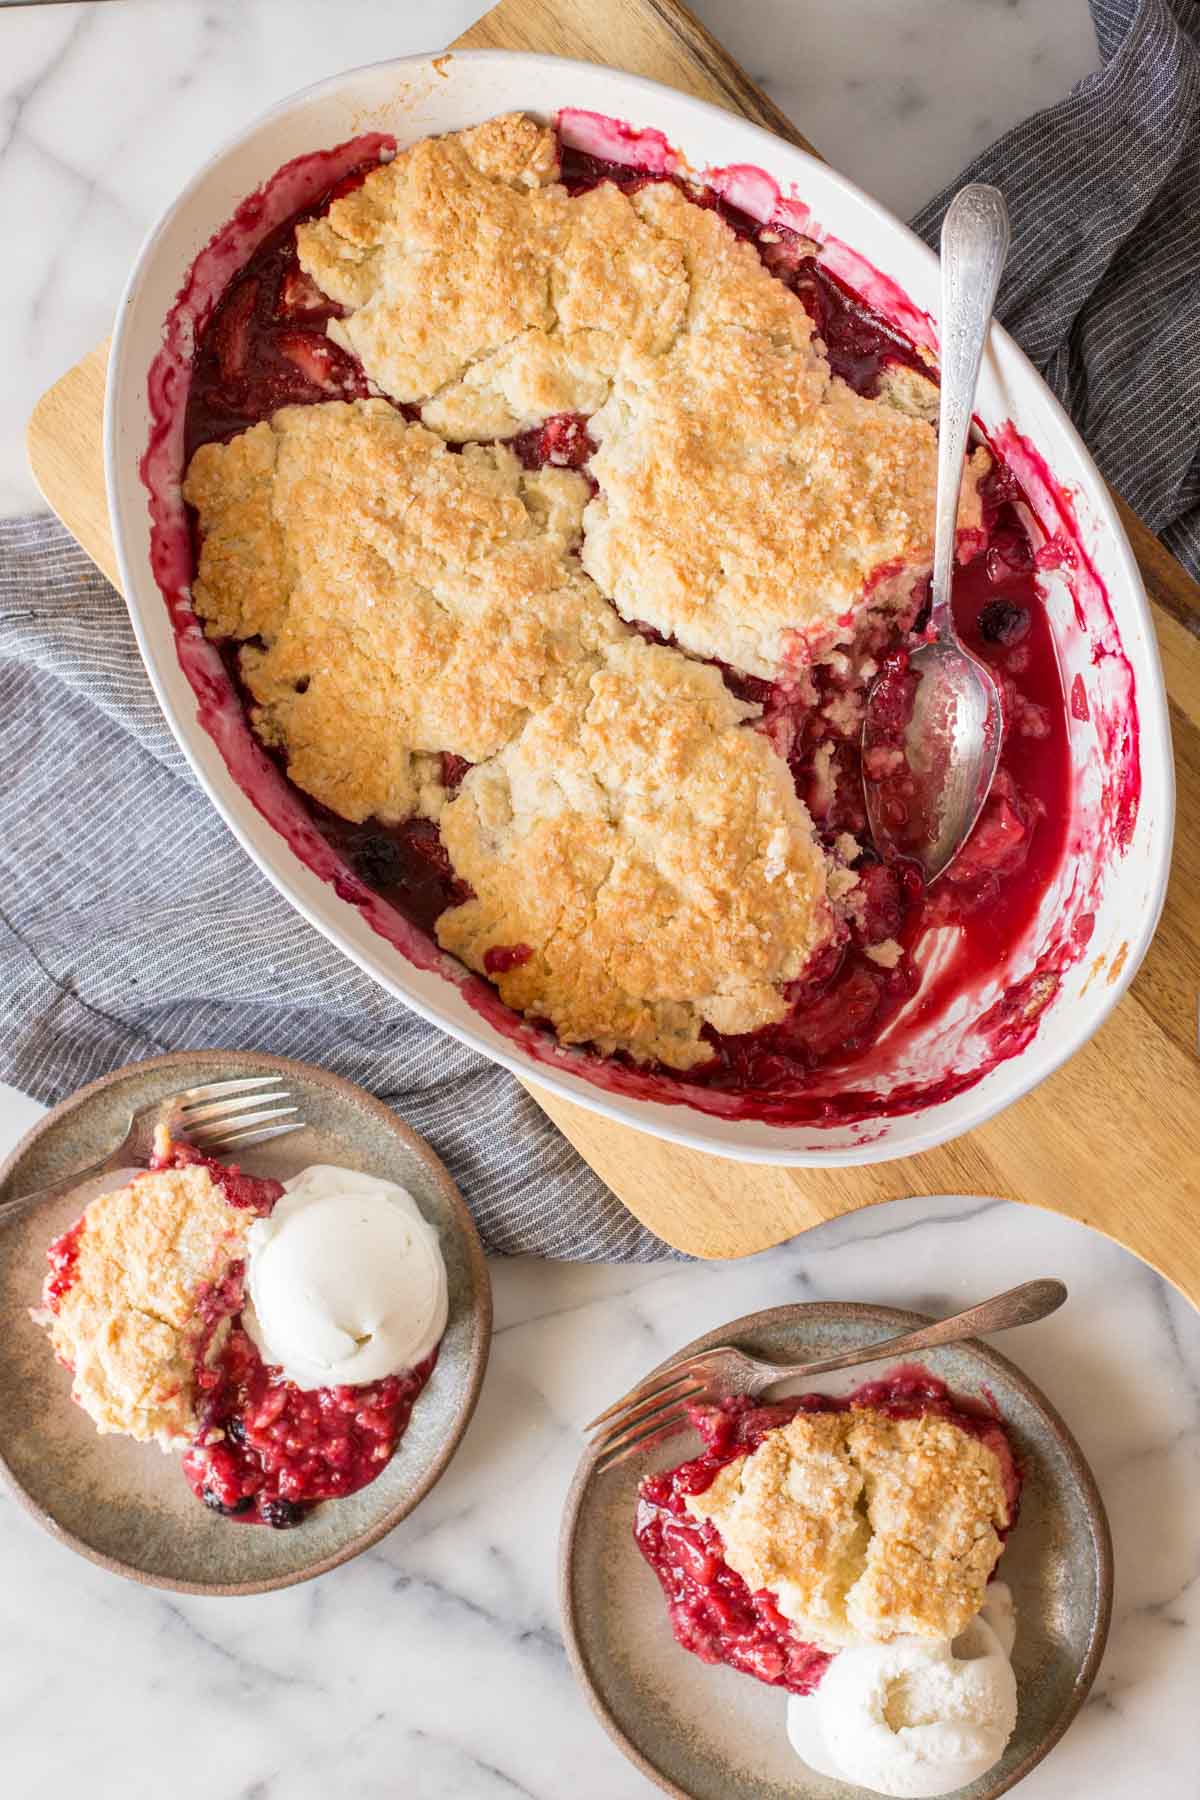 Overhead shot of Triple Berry Cobbler in a baking dish, with two plates of Triple Berry Cobbler each with a scoop of vanilla ice cream next to the baking dish.  